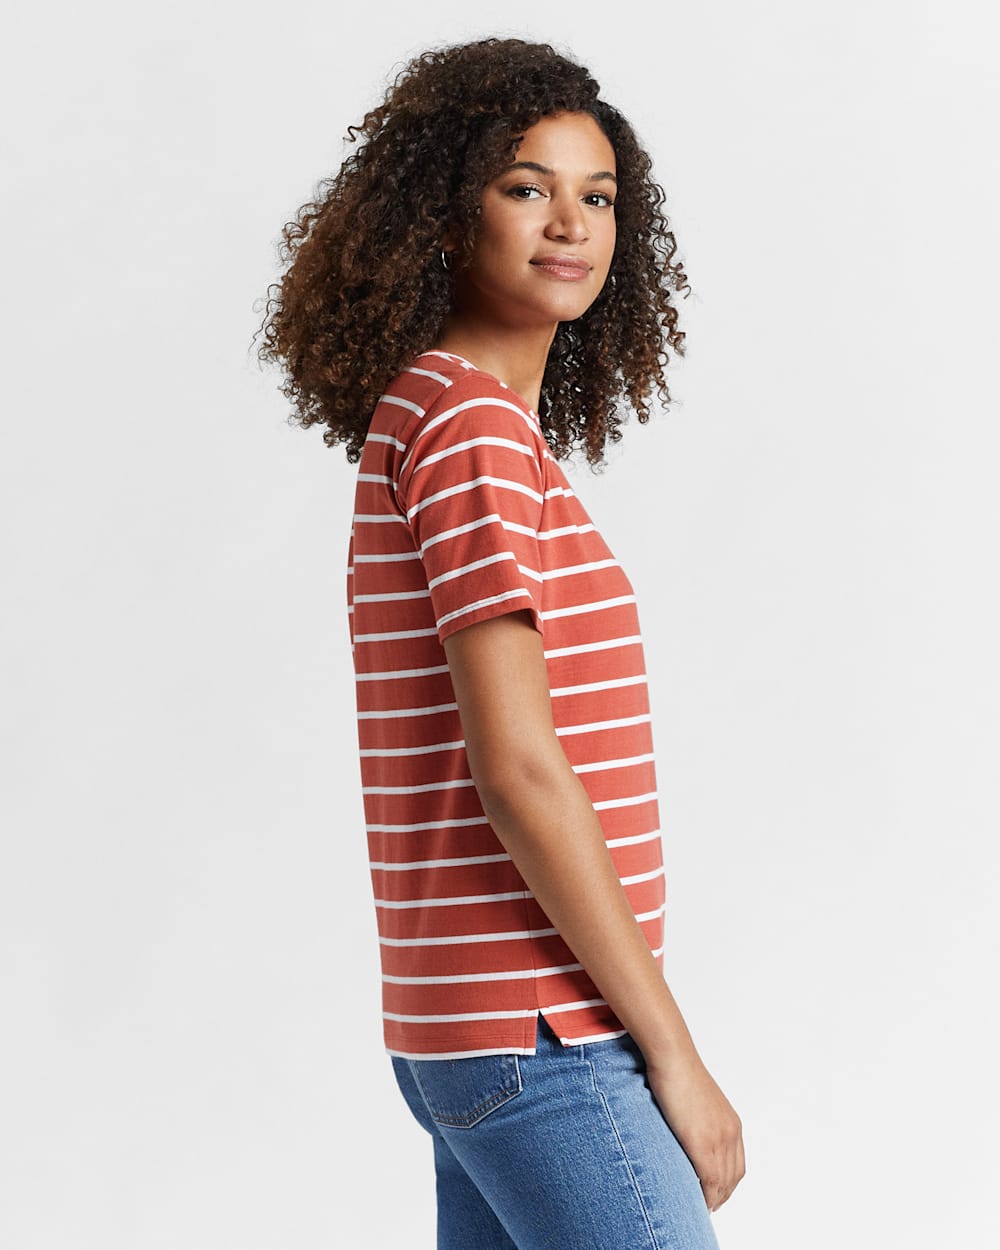 ALTERNATE VIEW OF WOMEN'S DESCHUTES STRIPE TEE IN SPICE RED/WHITE image number 2